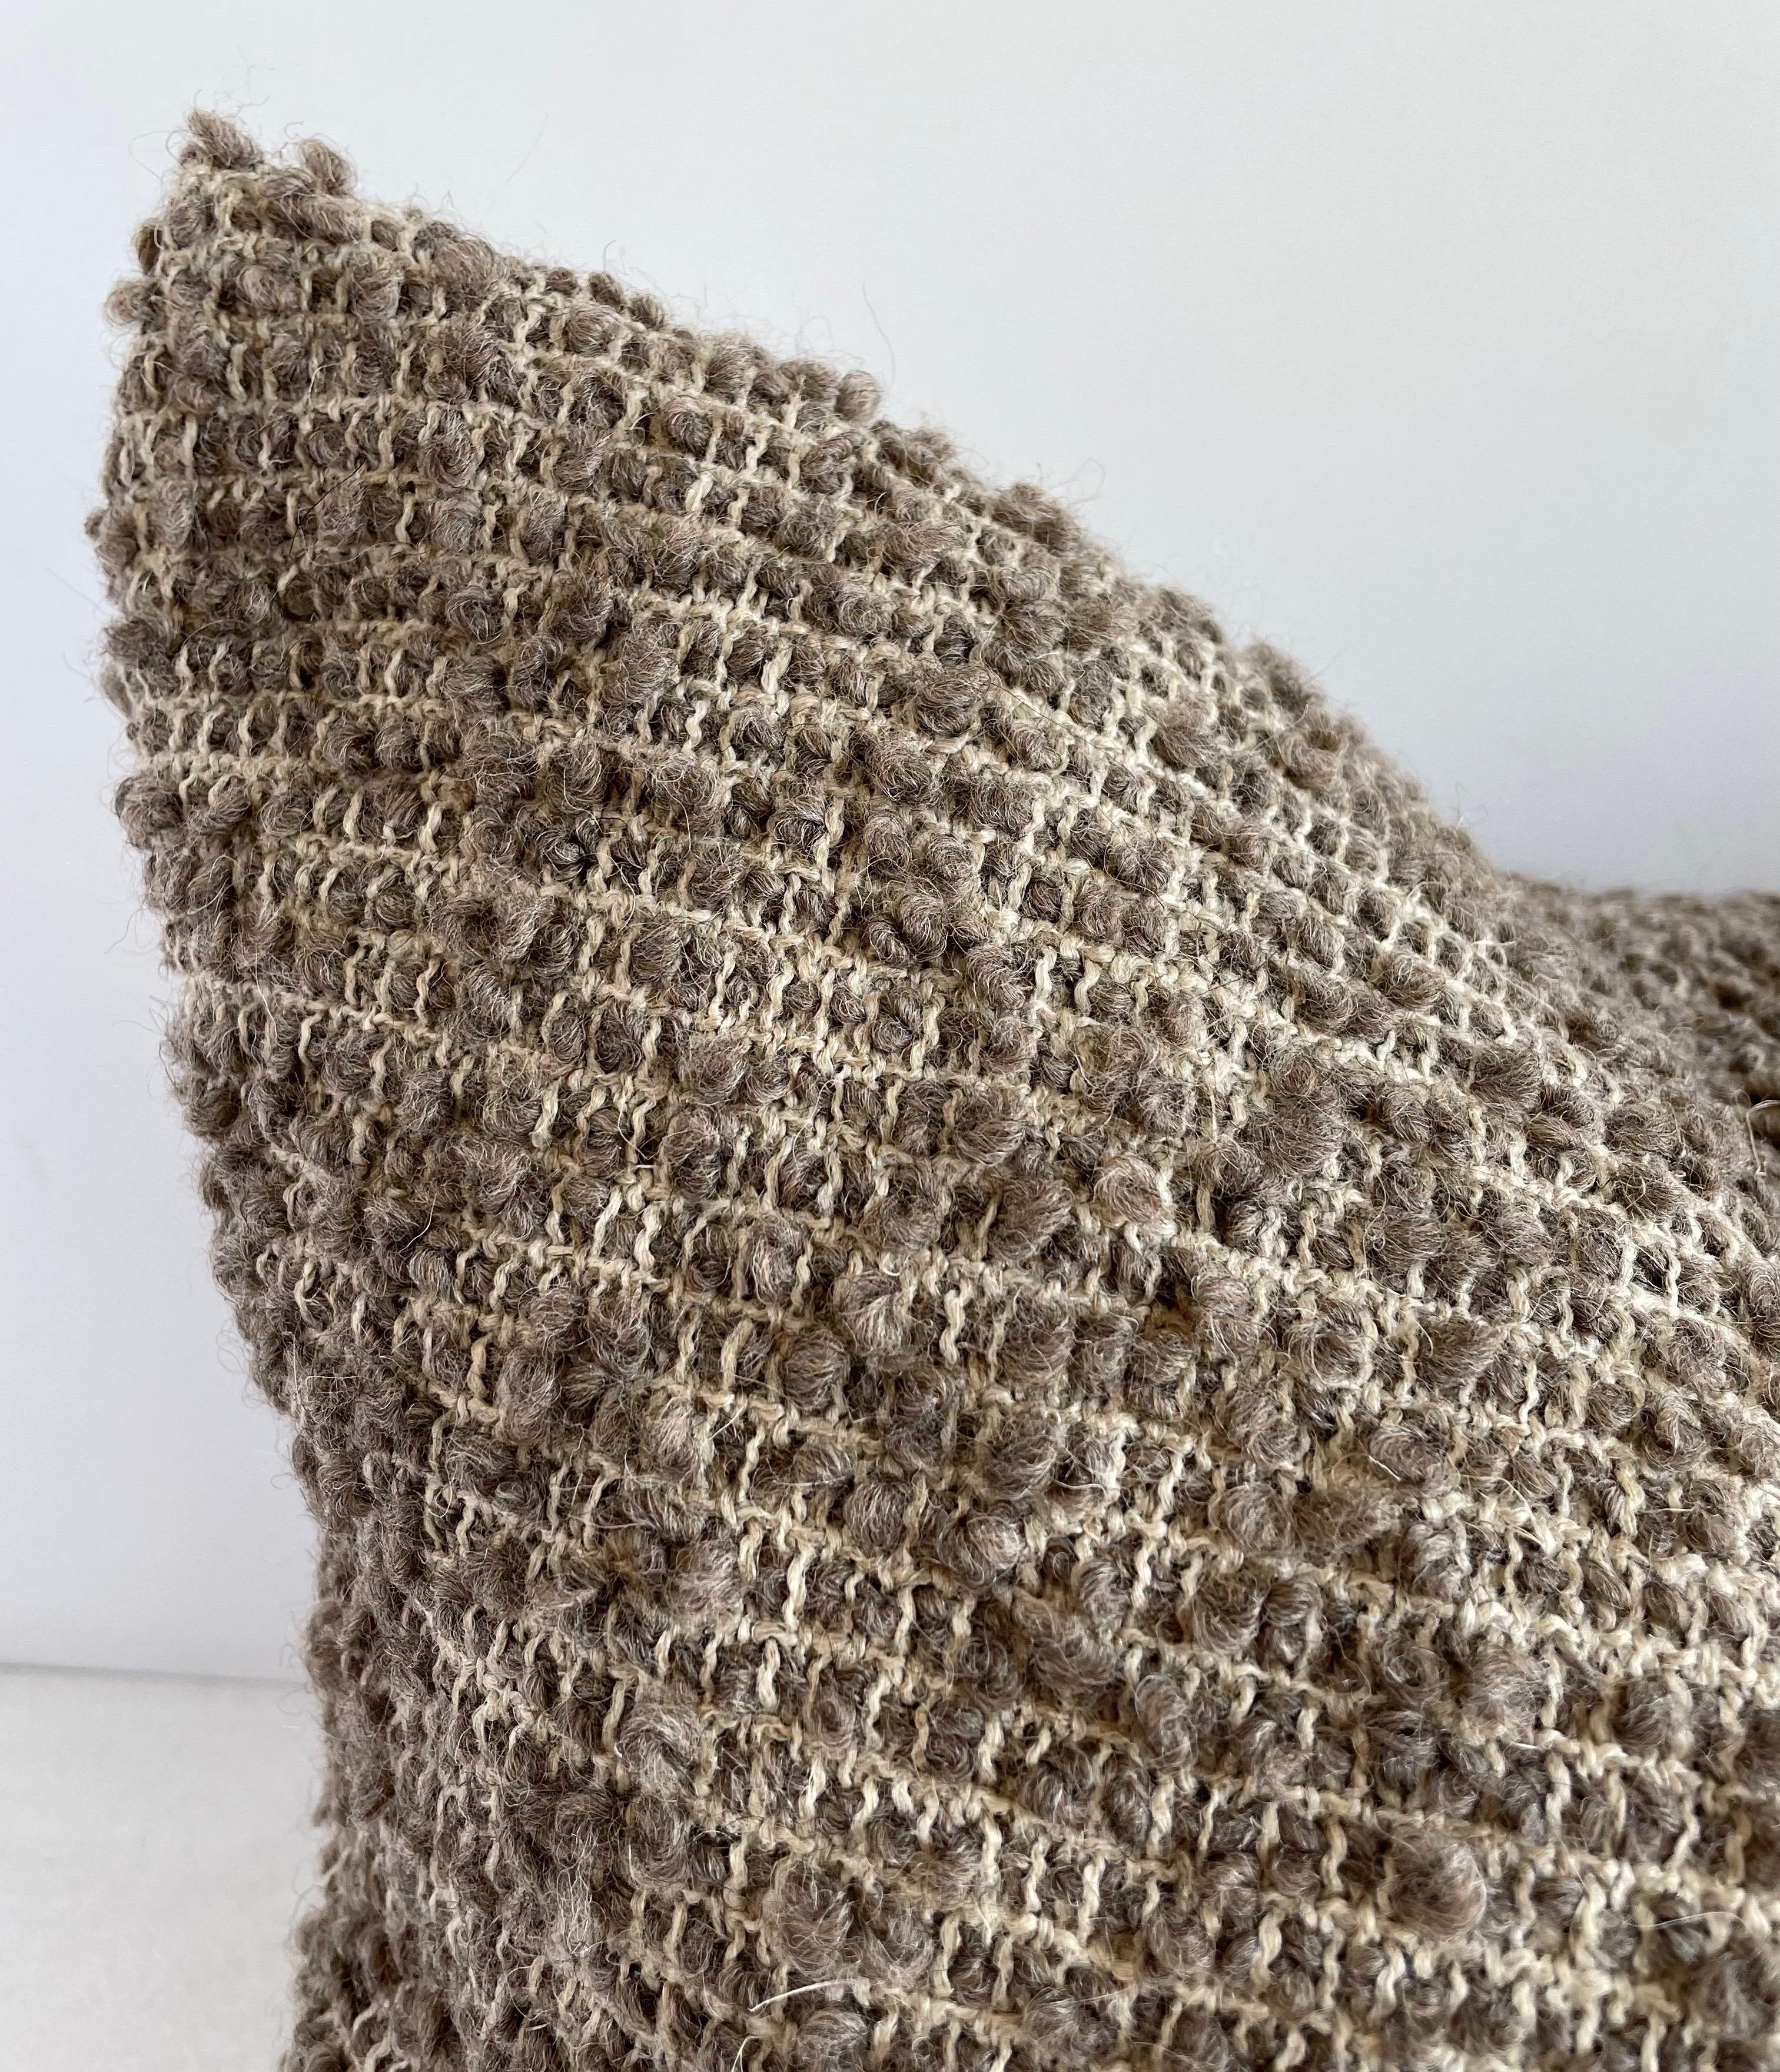 Woven in Belgium using traditional weaving techniques, Bloom Home Inc Buble is made with a Belgian linen warp and alternating Belgian linen/Alpaca wool weft. The boucle Alpaca weft creates a stunning texture that contrast beautifully with the